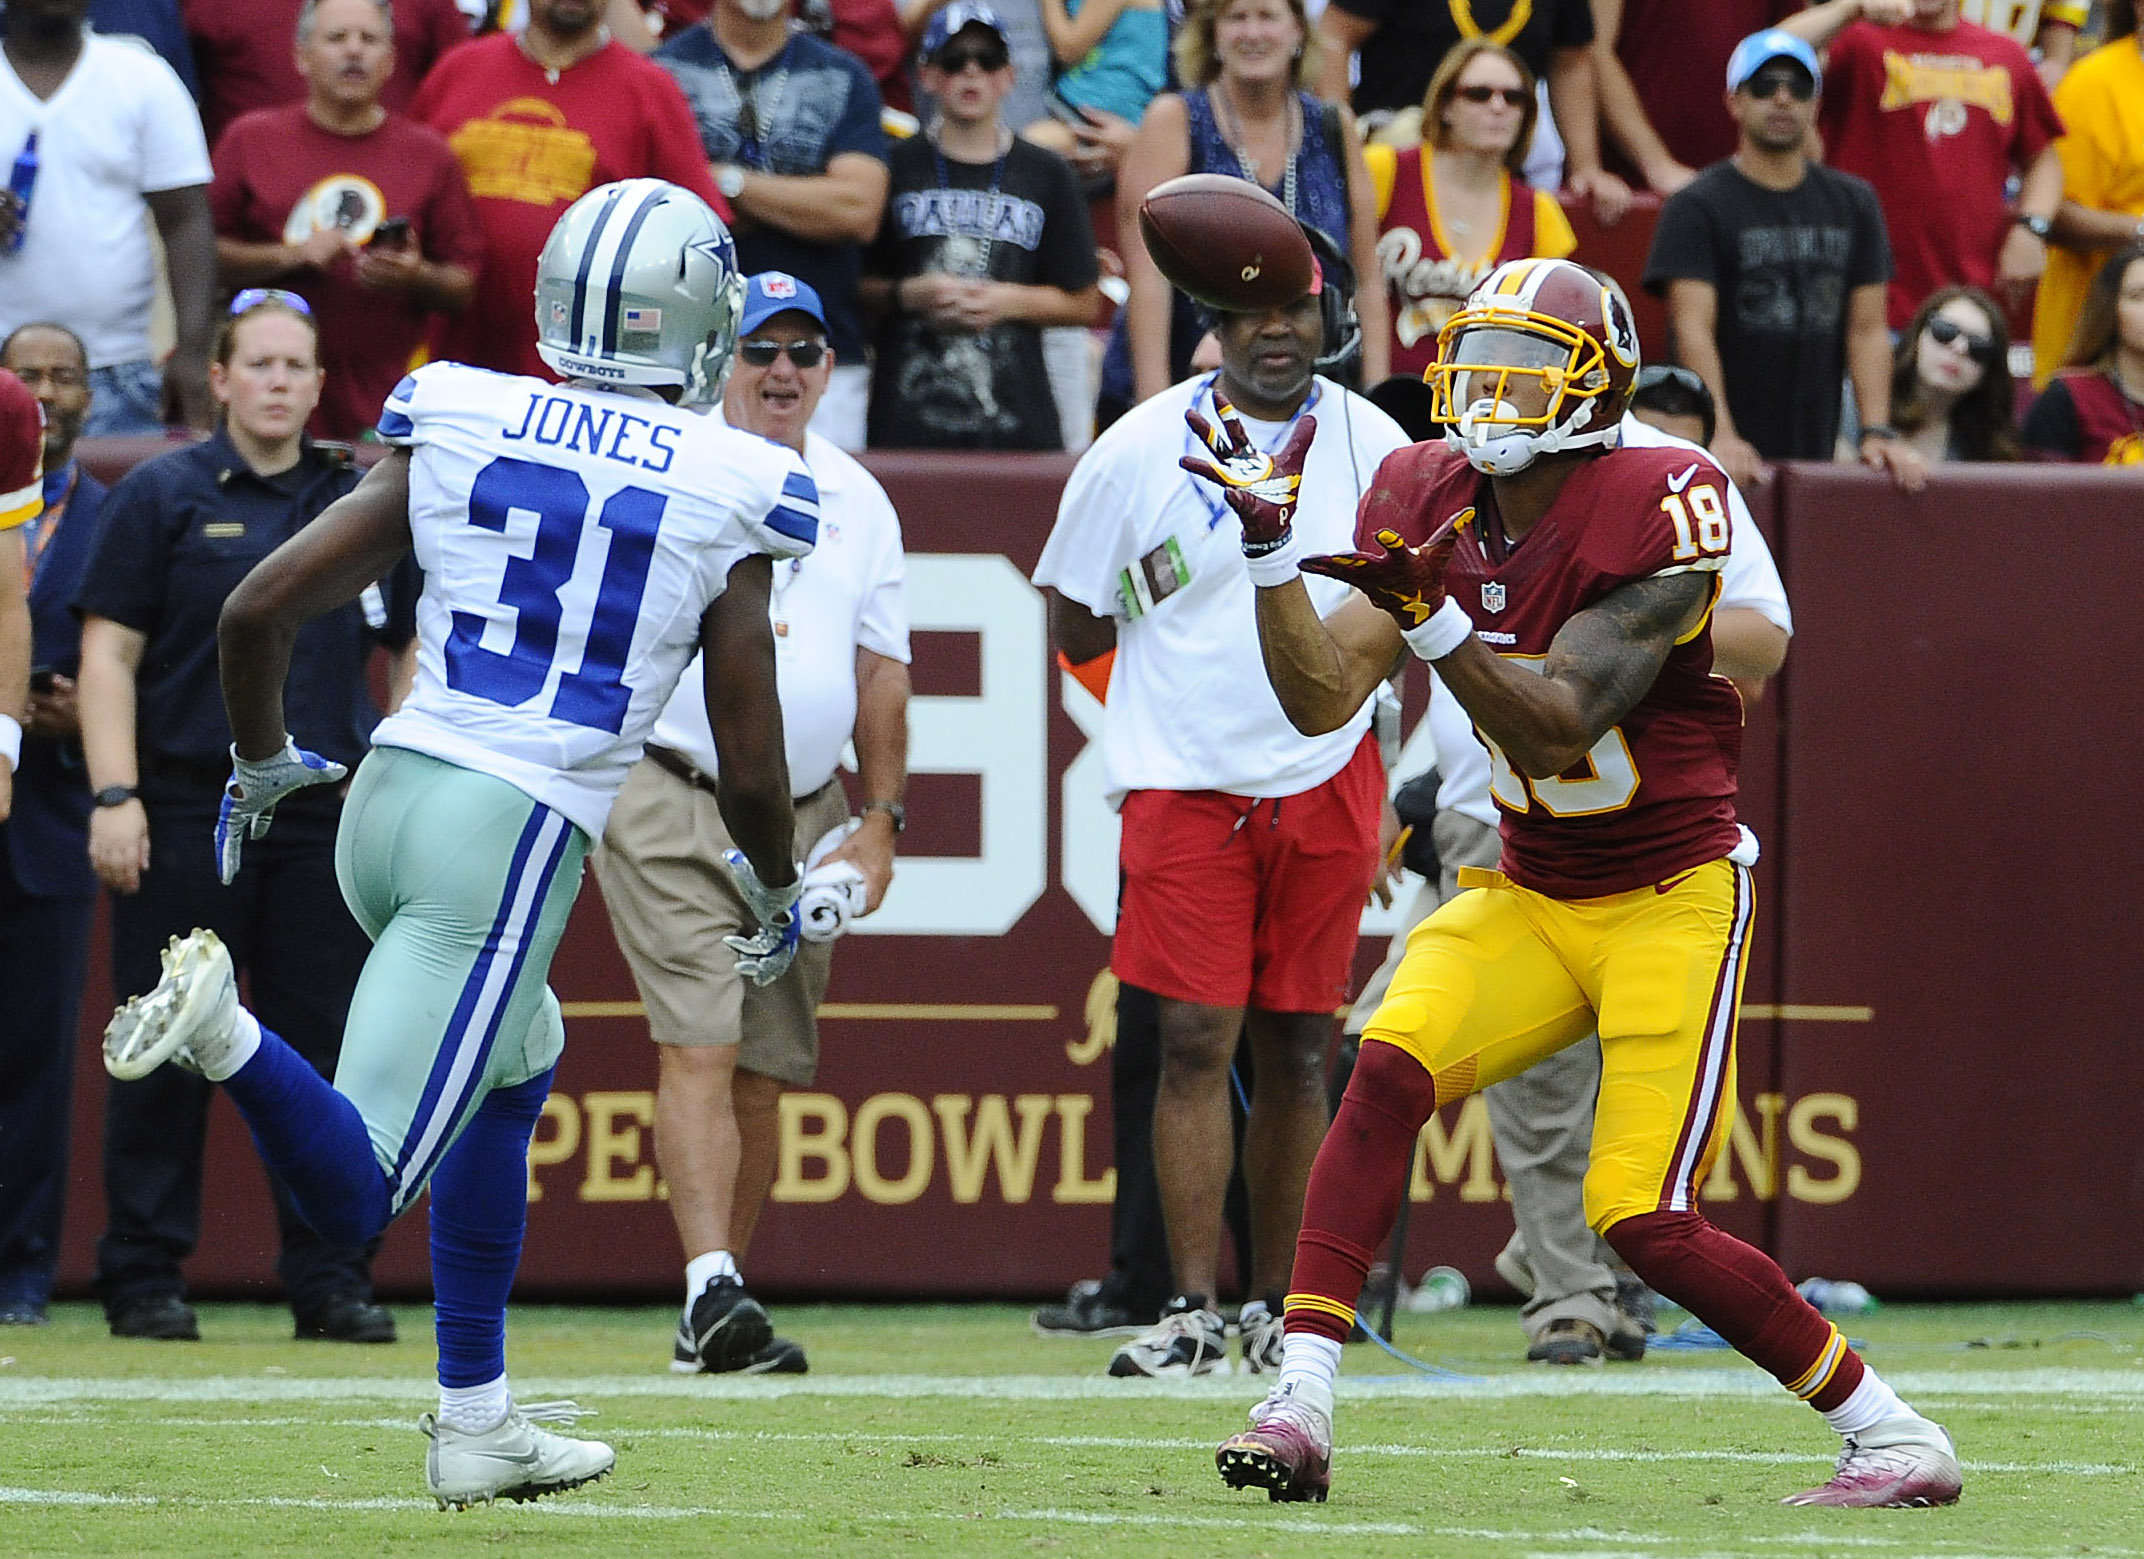 Sep 18, 2016; Landover, MD, USA; Washington Redskins wide receiver Josh Doctson (18) makes a reception as Dallas Cowboys free safety Byron Jones (31) looks on during the second half at FedEx Field. The Dallas Cowboys won 27 - 23. Mandatory Credit: Brad Mills-USA TODAY Sports